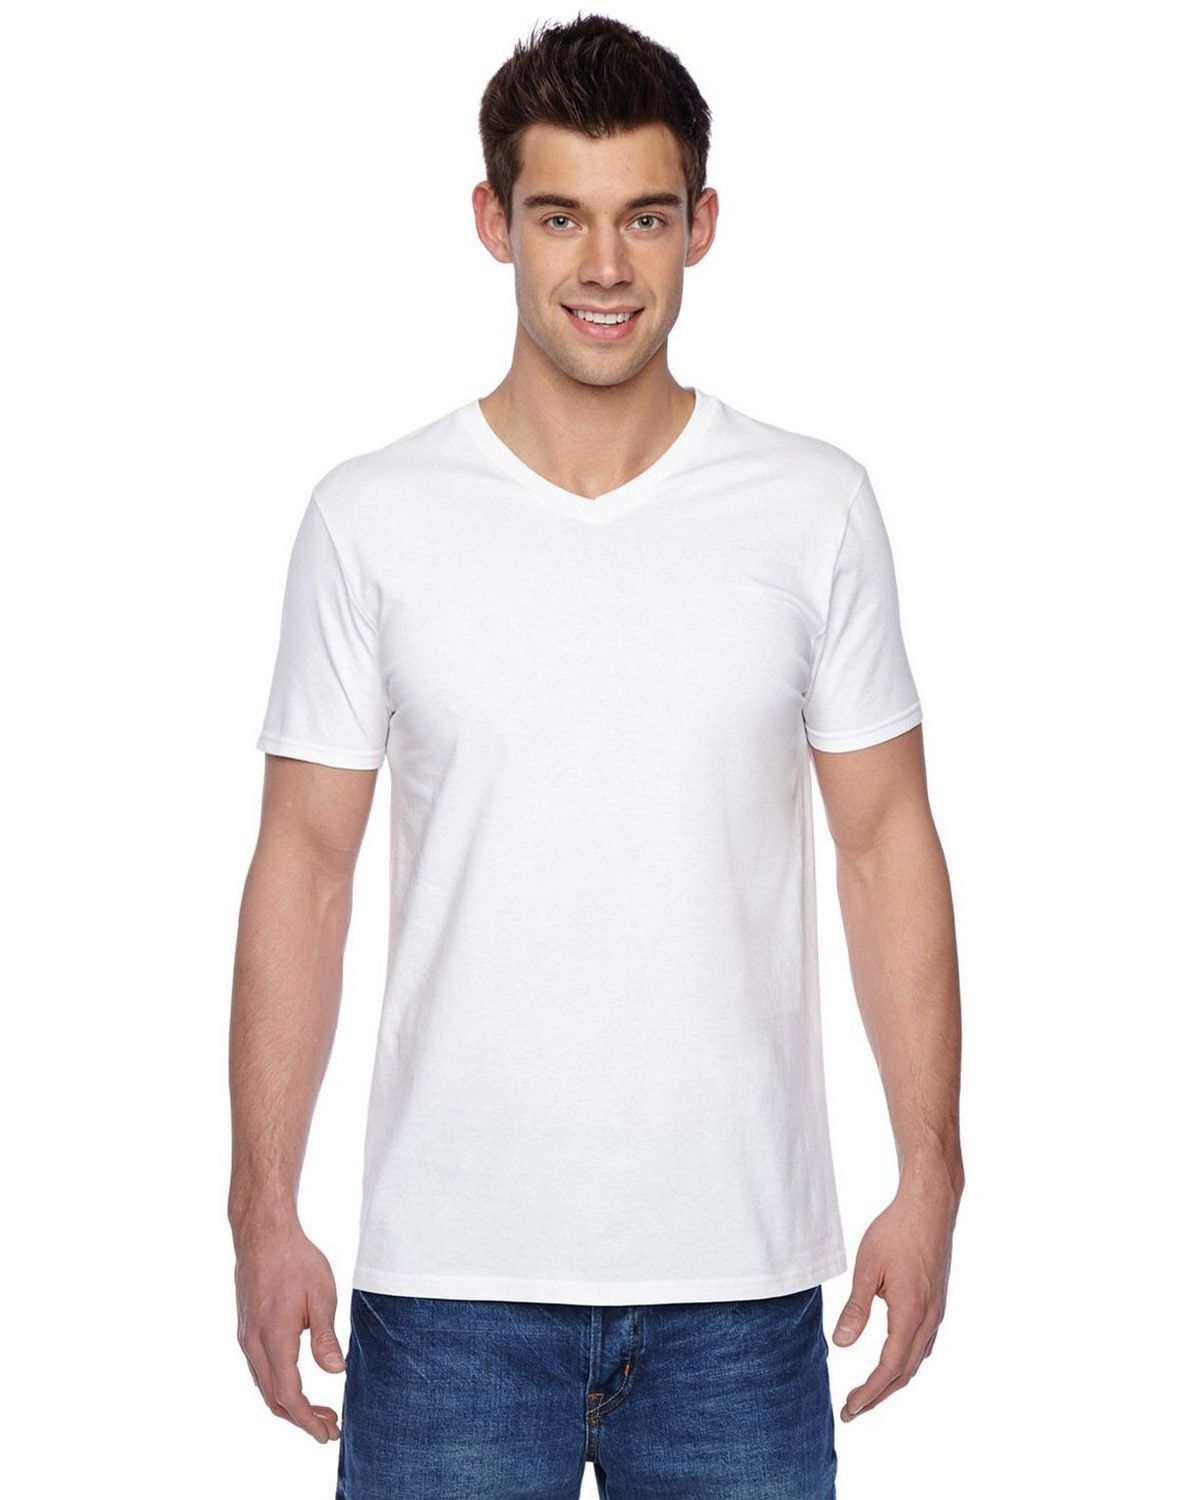 Size Chart for Fruit Of The Loom SFV Adult Sofspun V-Neck T-Shirt